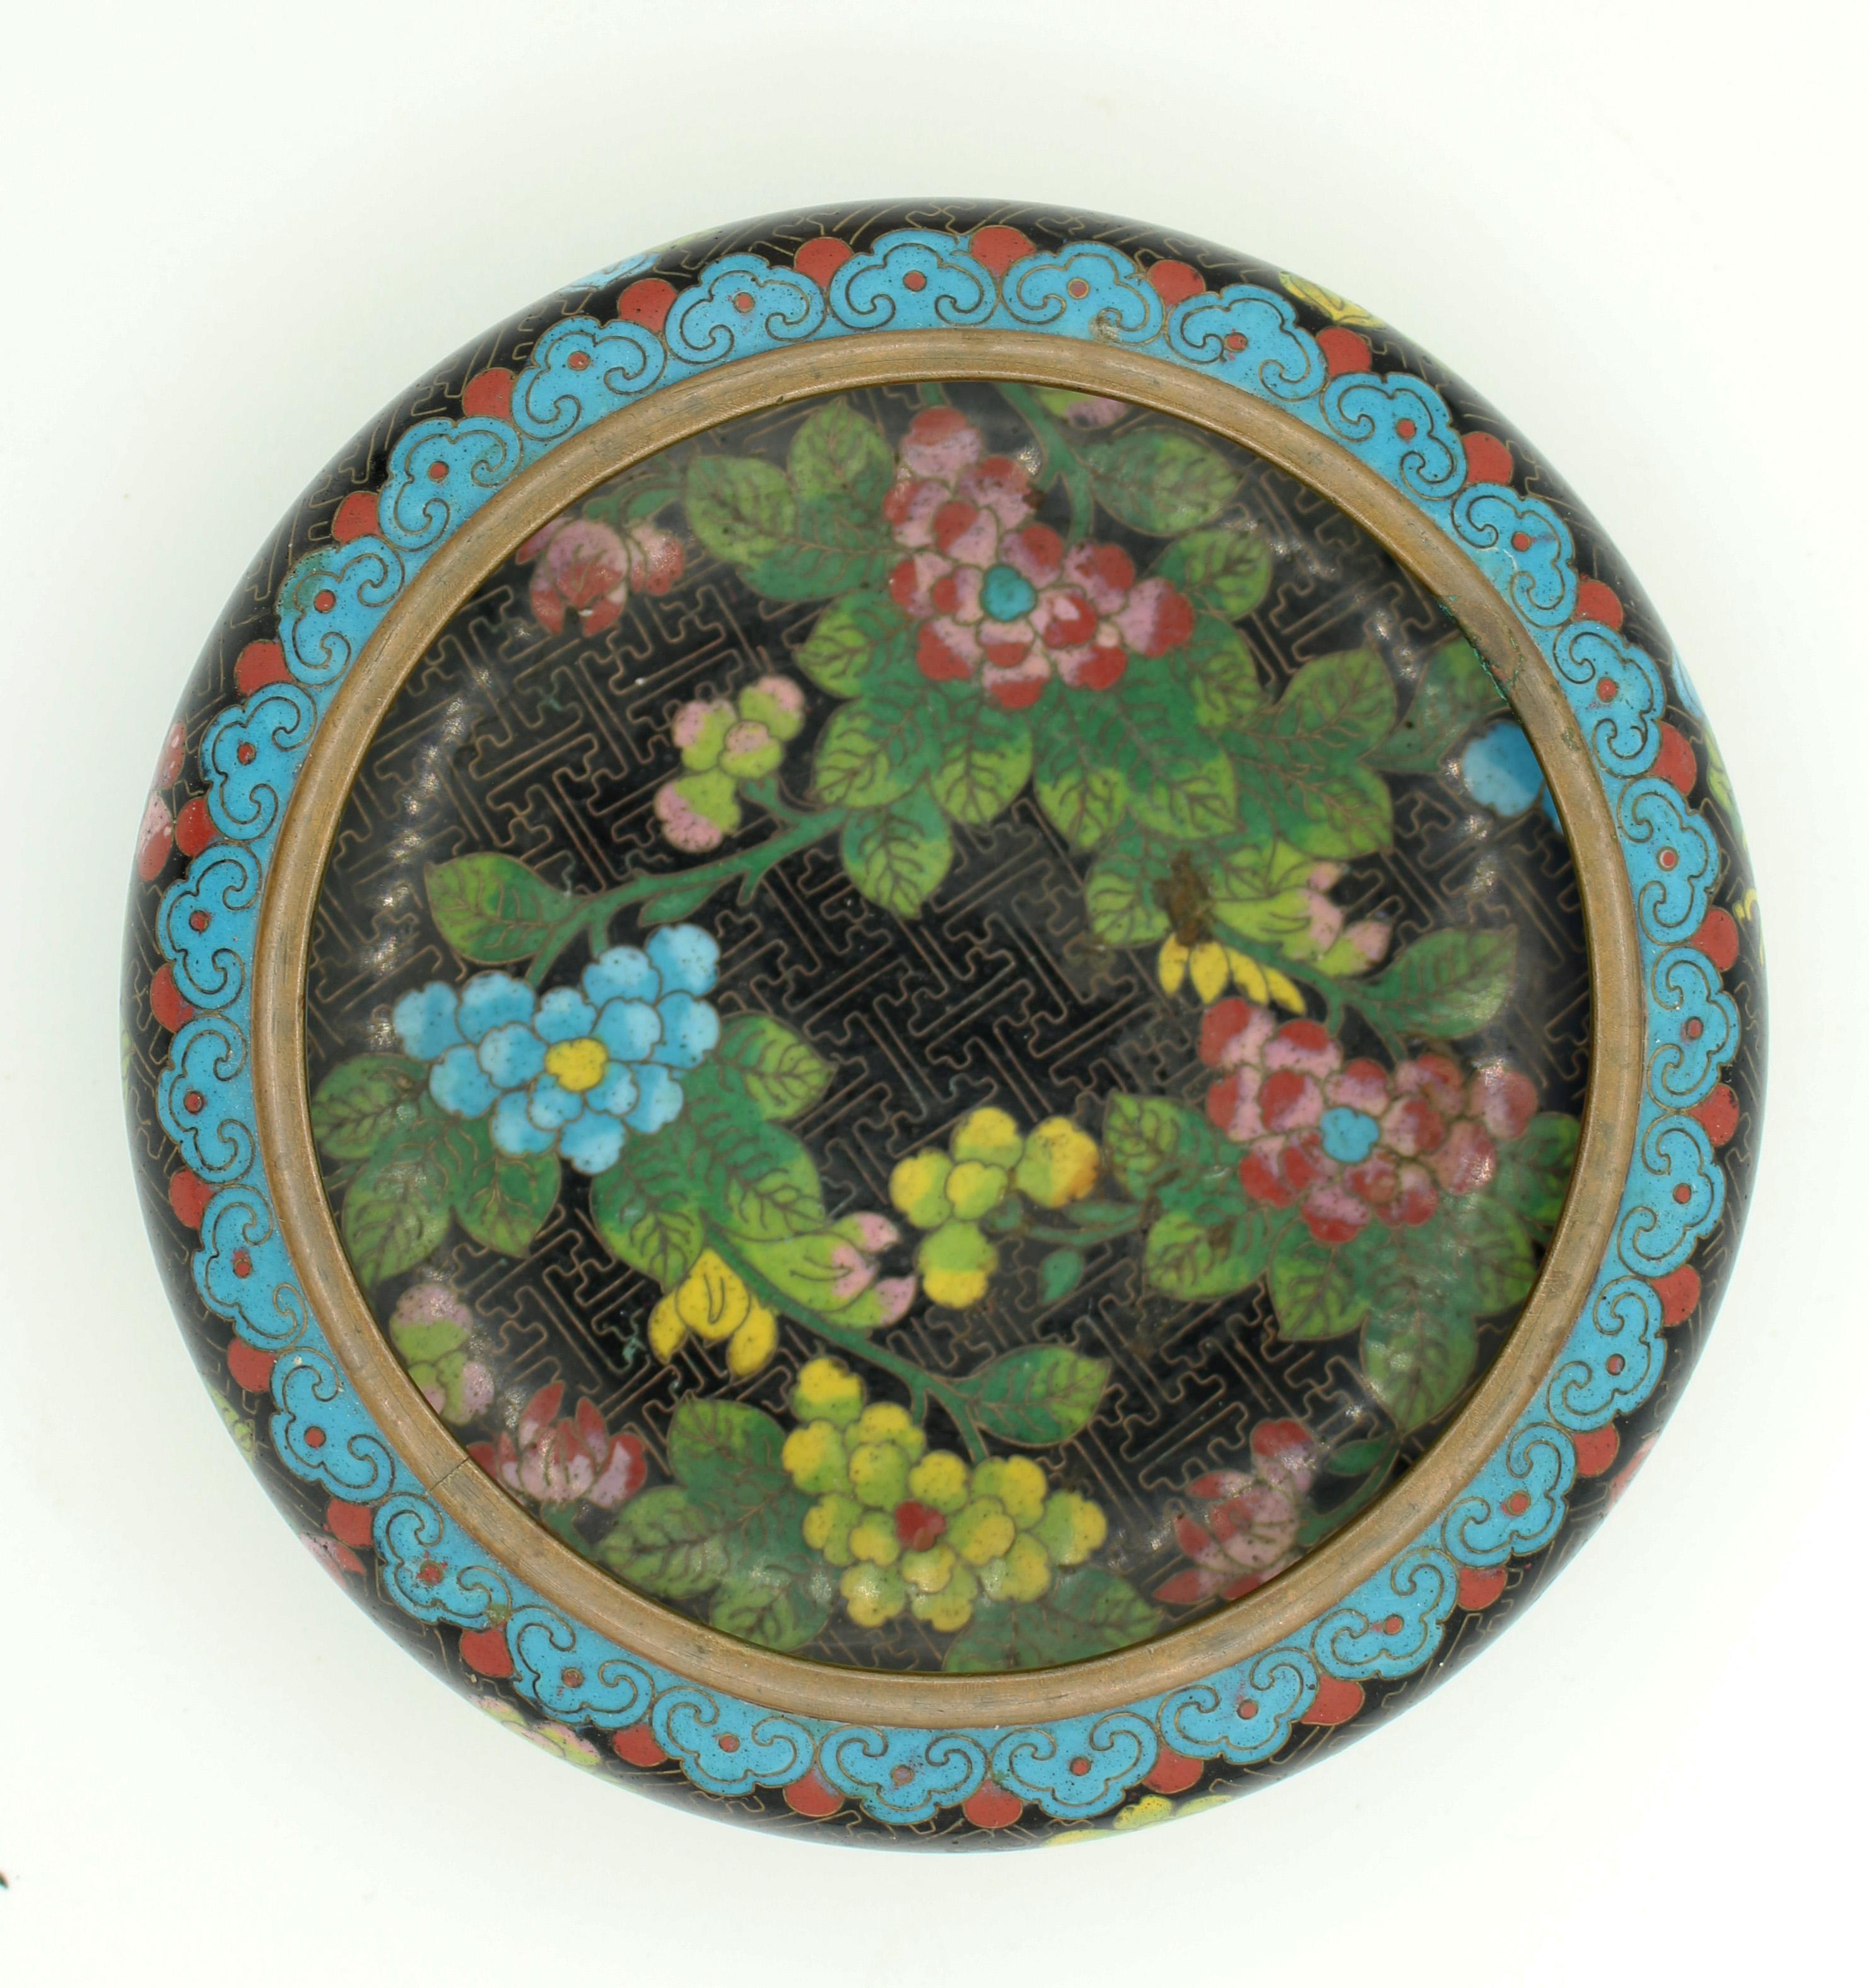 Qing dynasty cloisonné bowl, circa 1900 late Chinese. Brass cloisons and enamel on brass. Chrysanthemums & spider chrysanthemum decoration; good shading in the color fields. Measures; 6 1/2